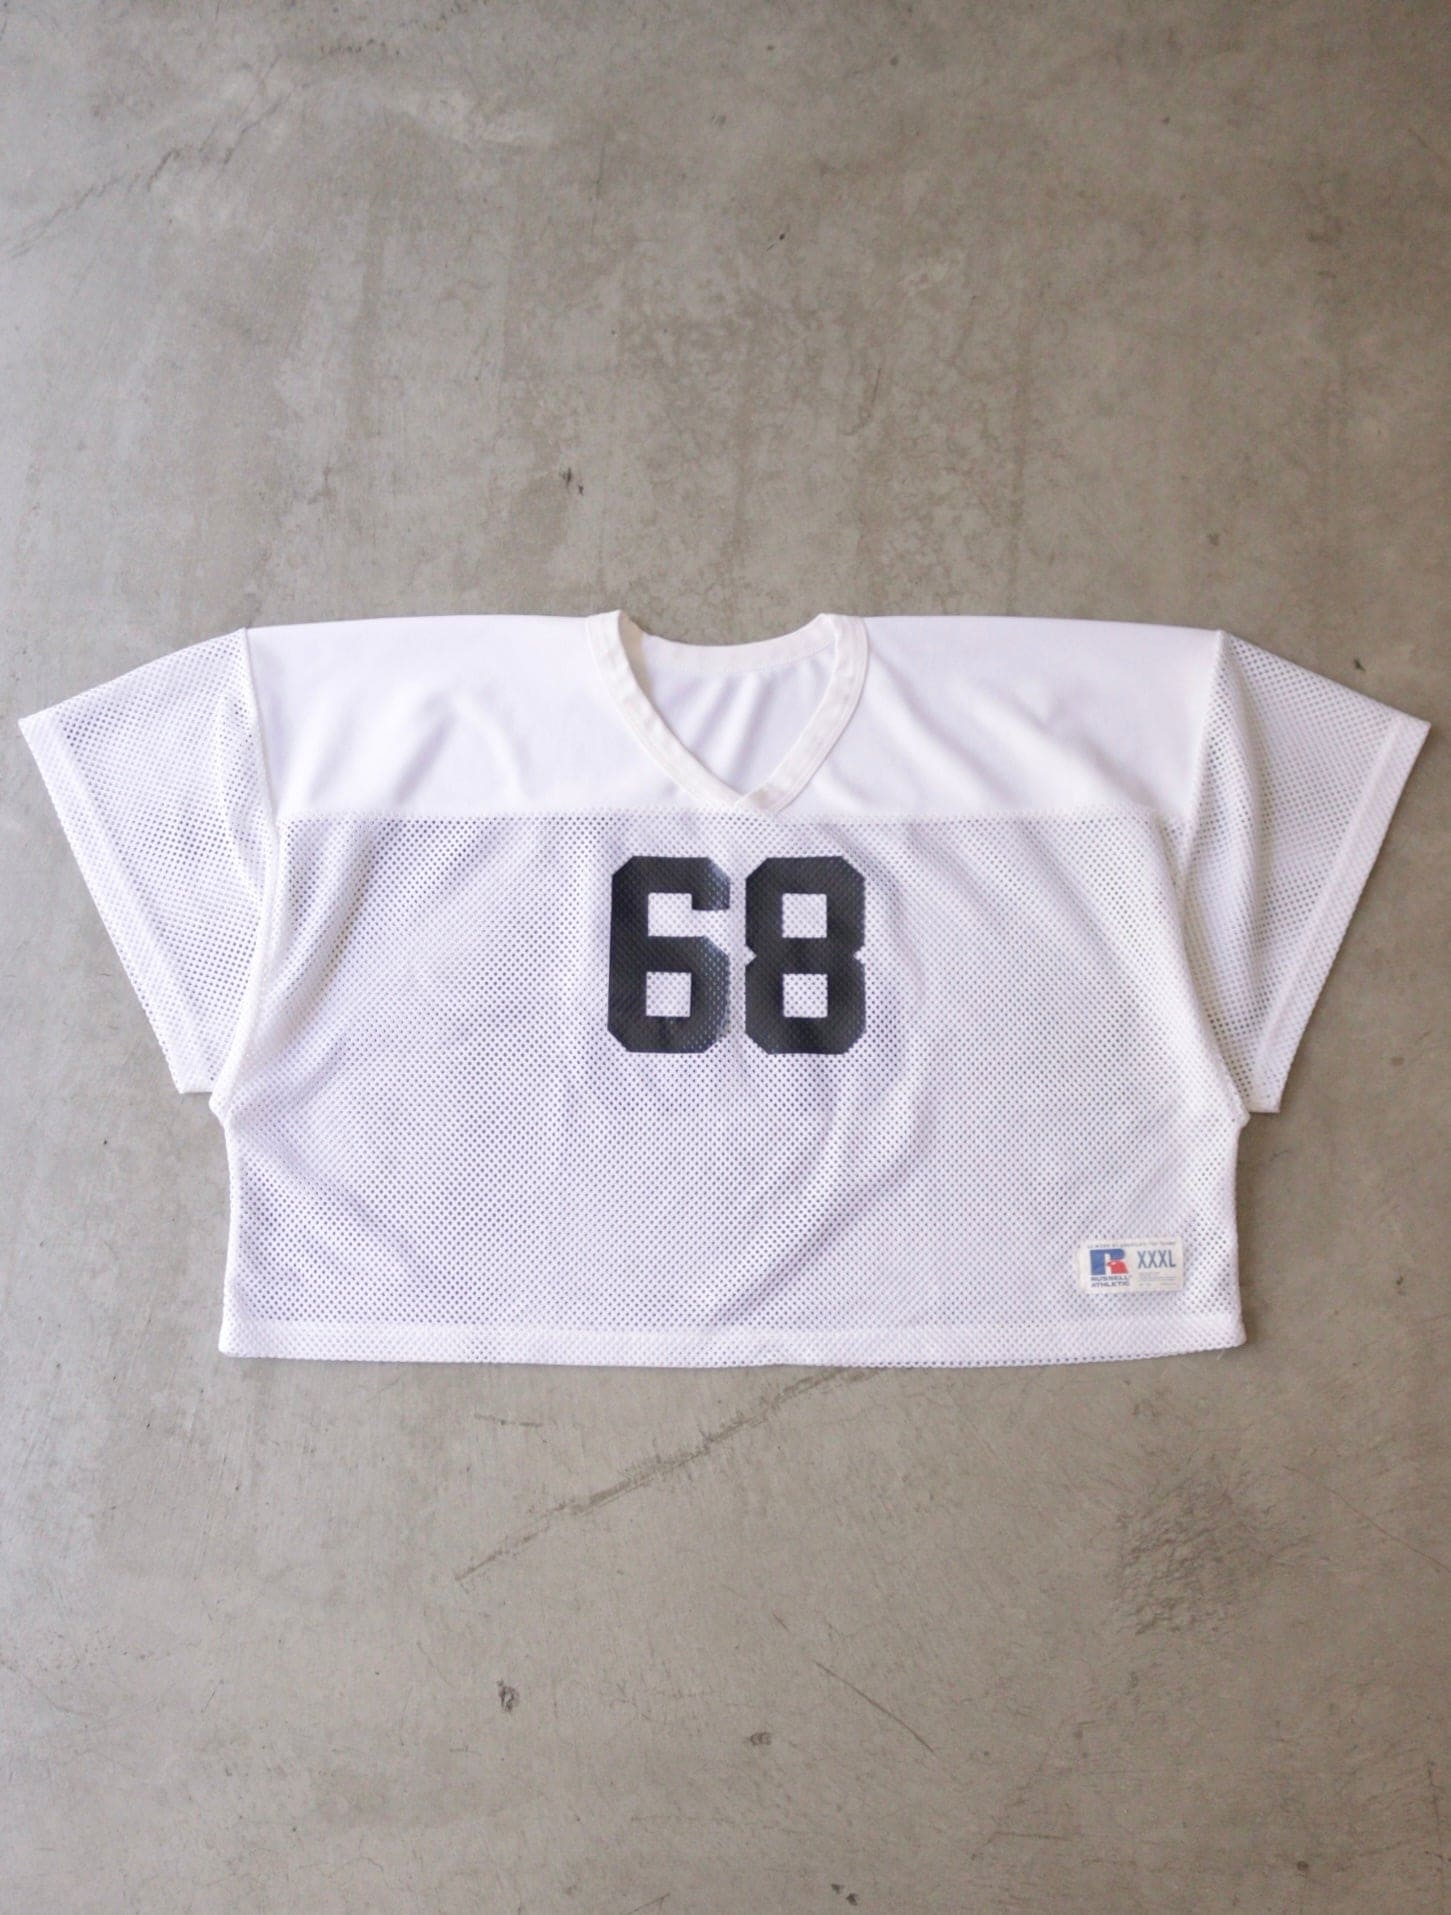 1980S RUSSELL 68 MESH CROPPED JERSEY